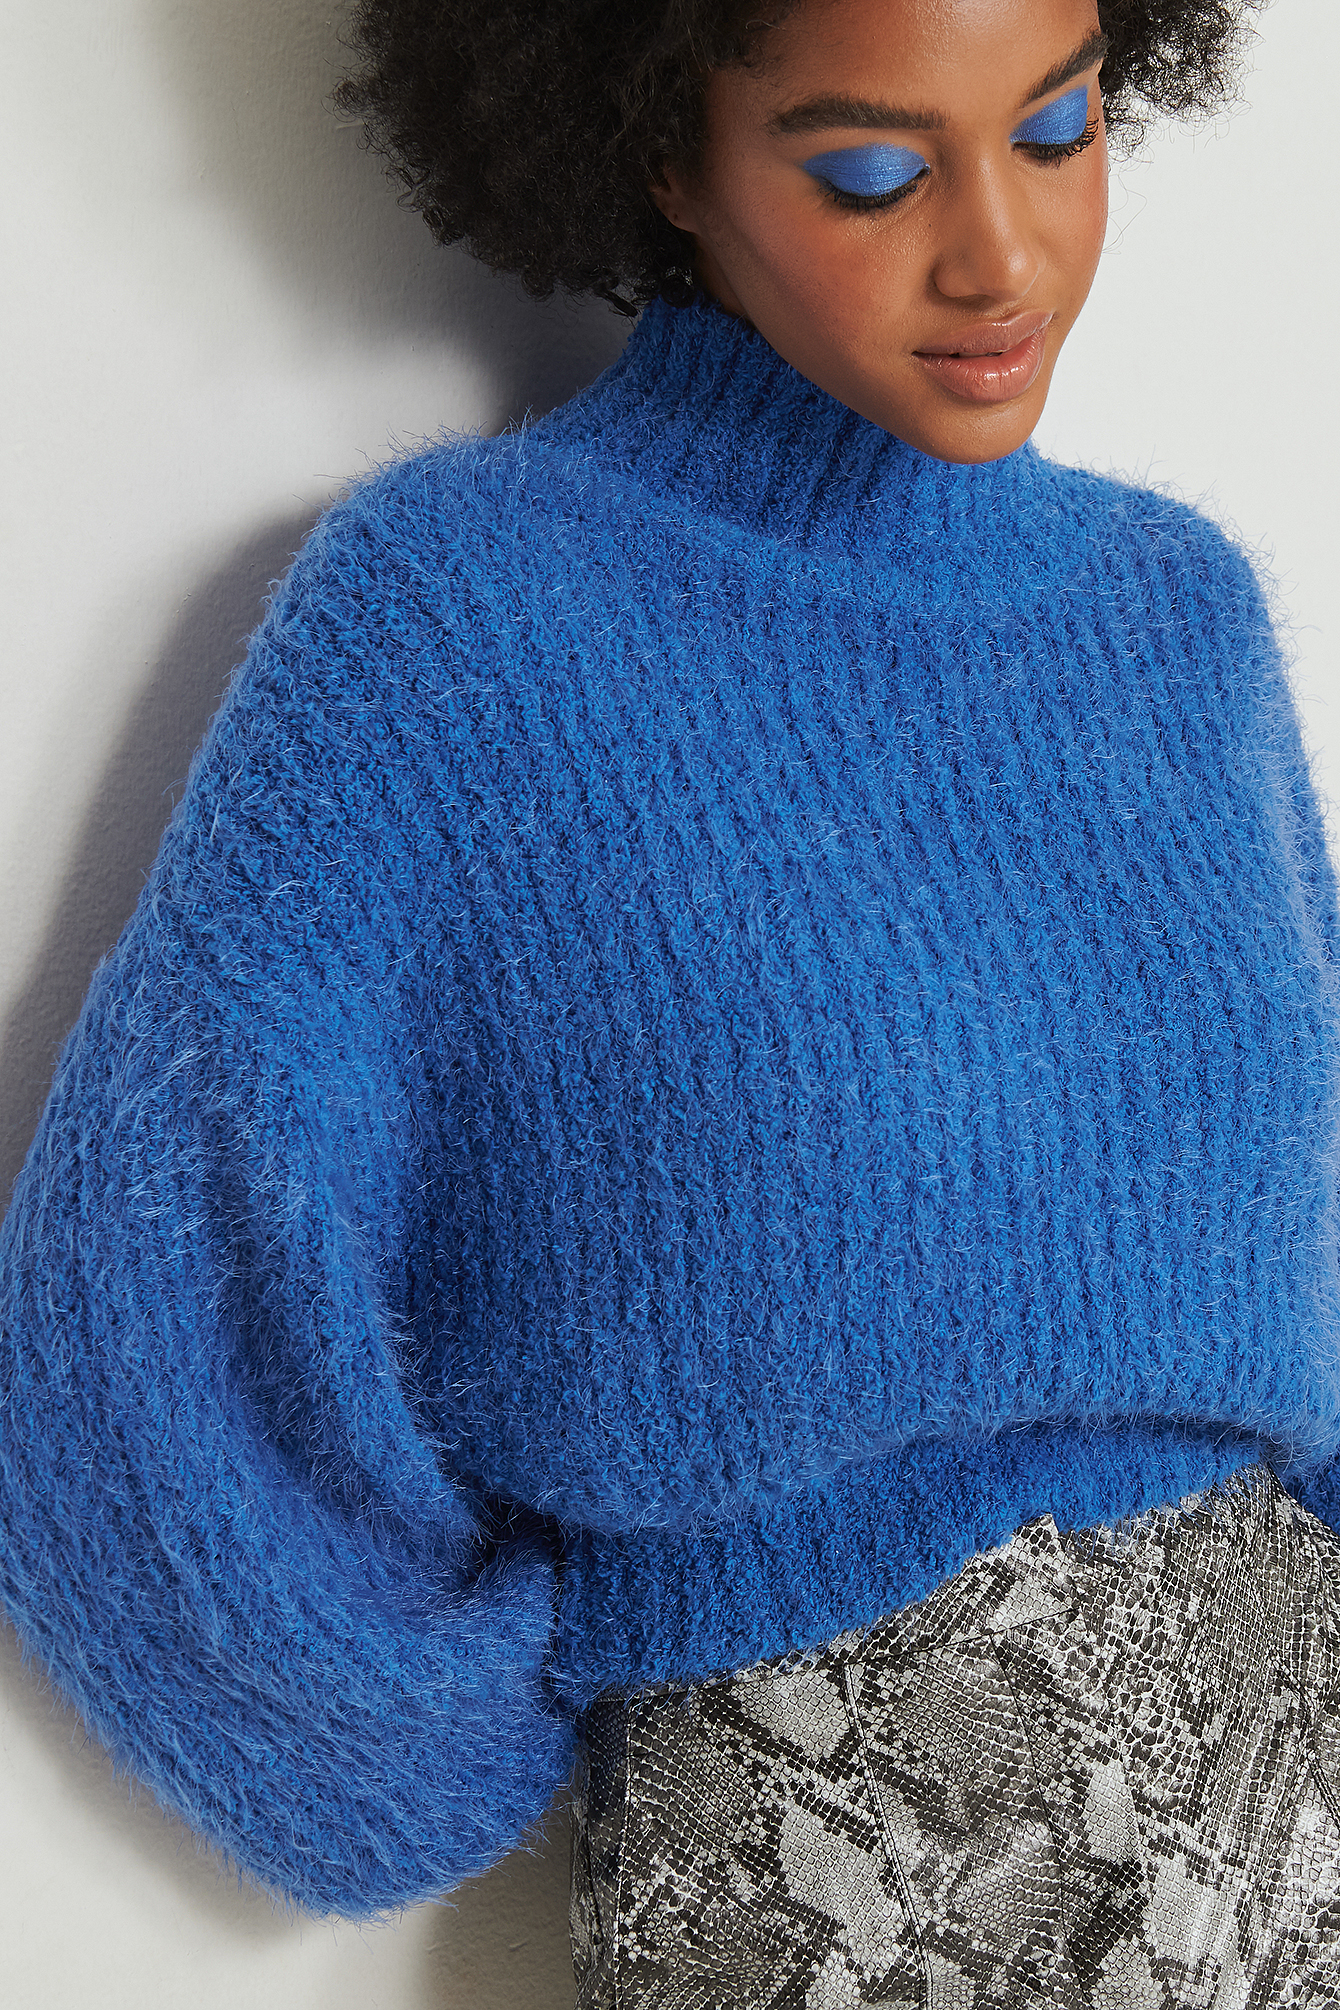 Blue Fluffy Knitted Sweater